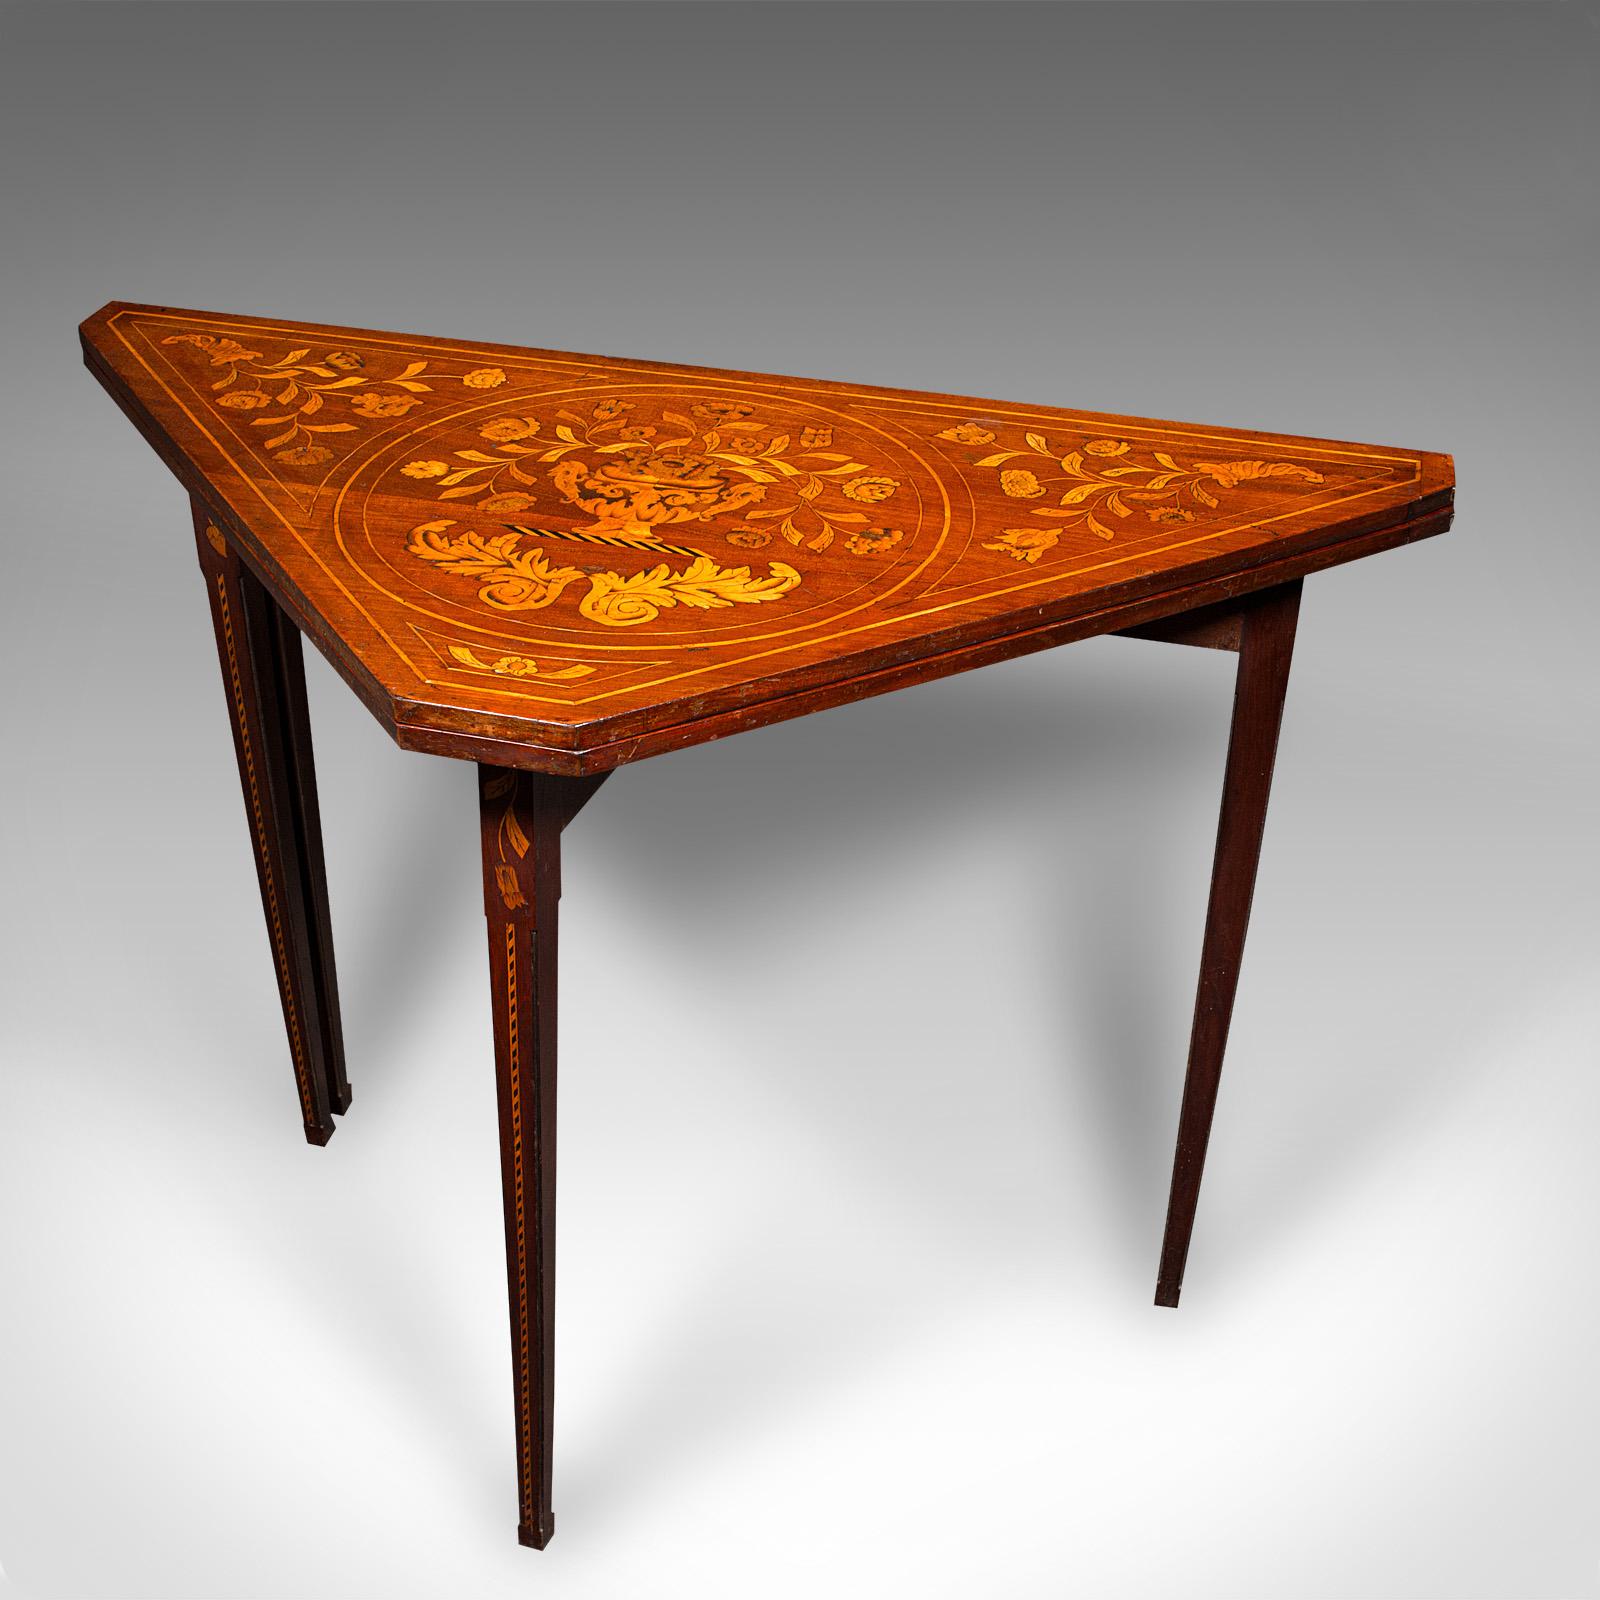 Antique Flower Display Table, Dutch, Inlaid, Console, Gate Leg, Georgian, 1780 In Good Condition For Sale In Hele, Devon, GB